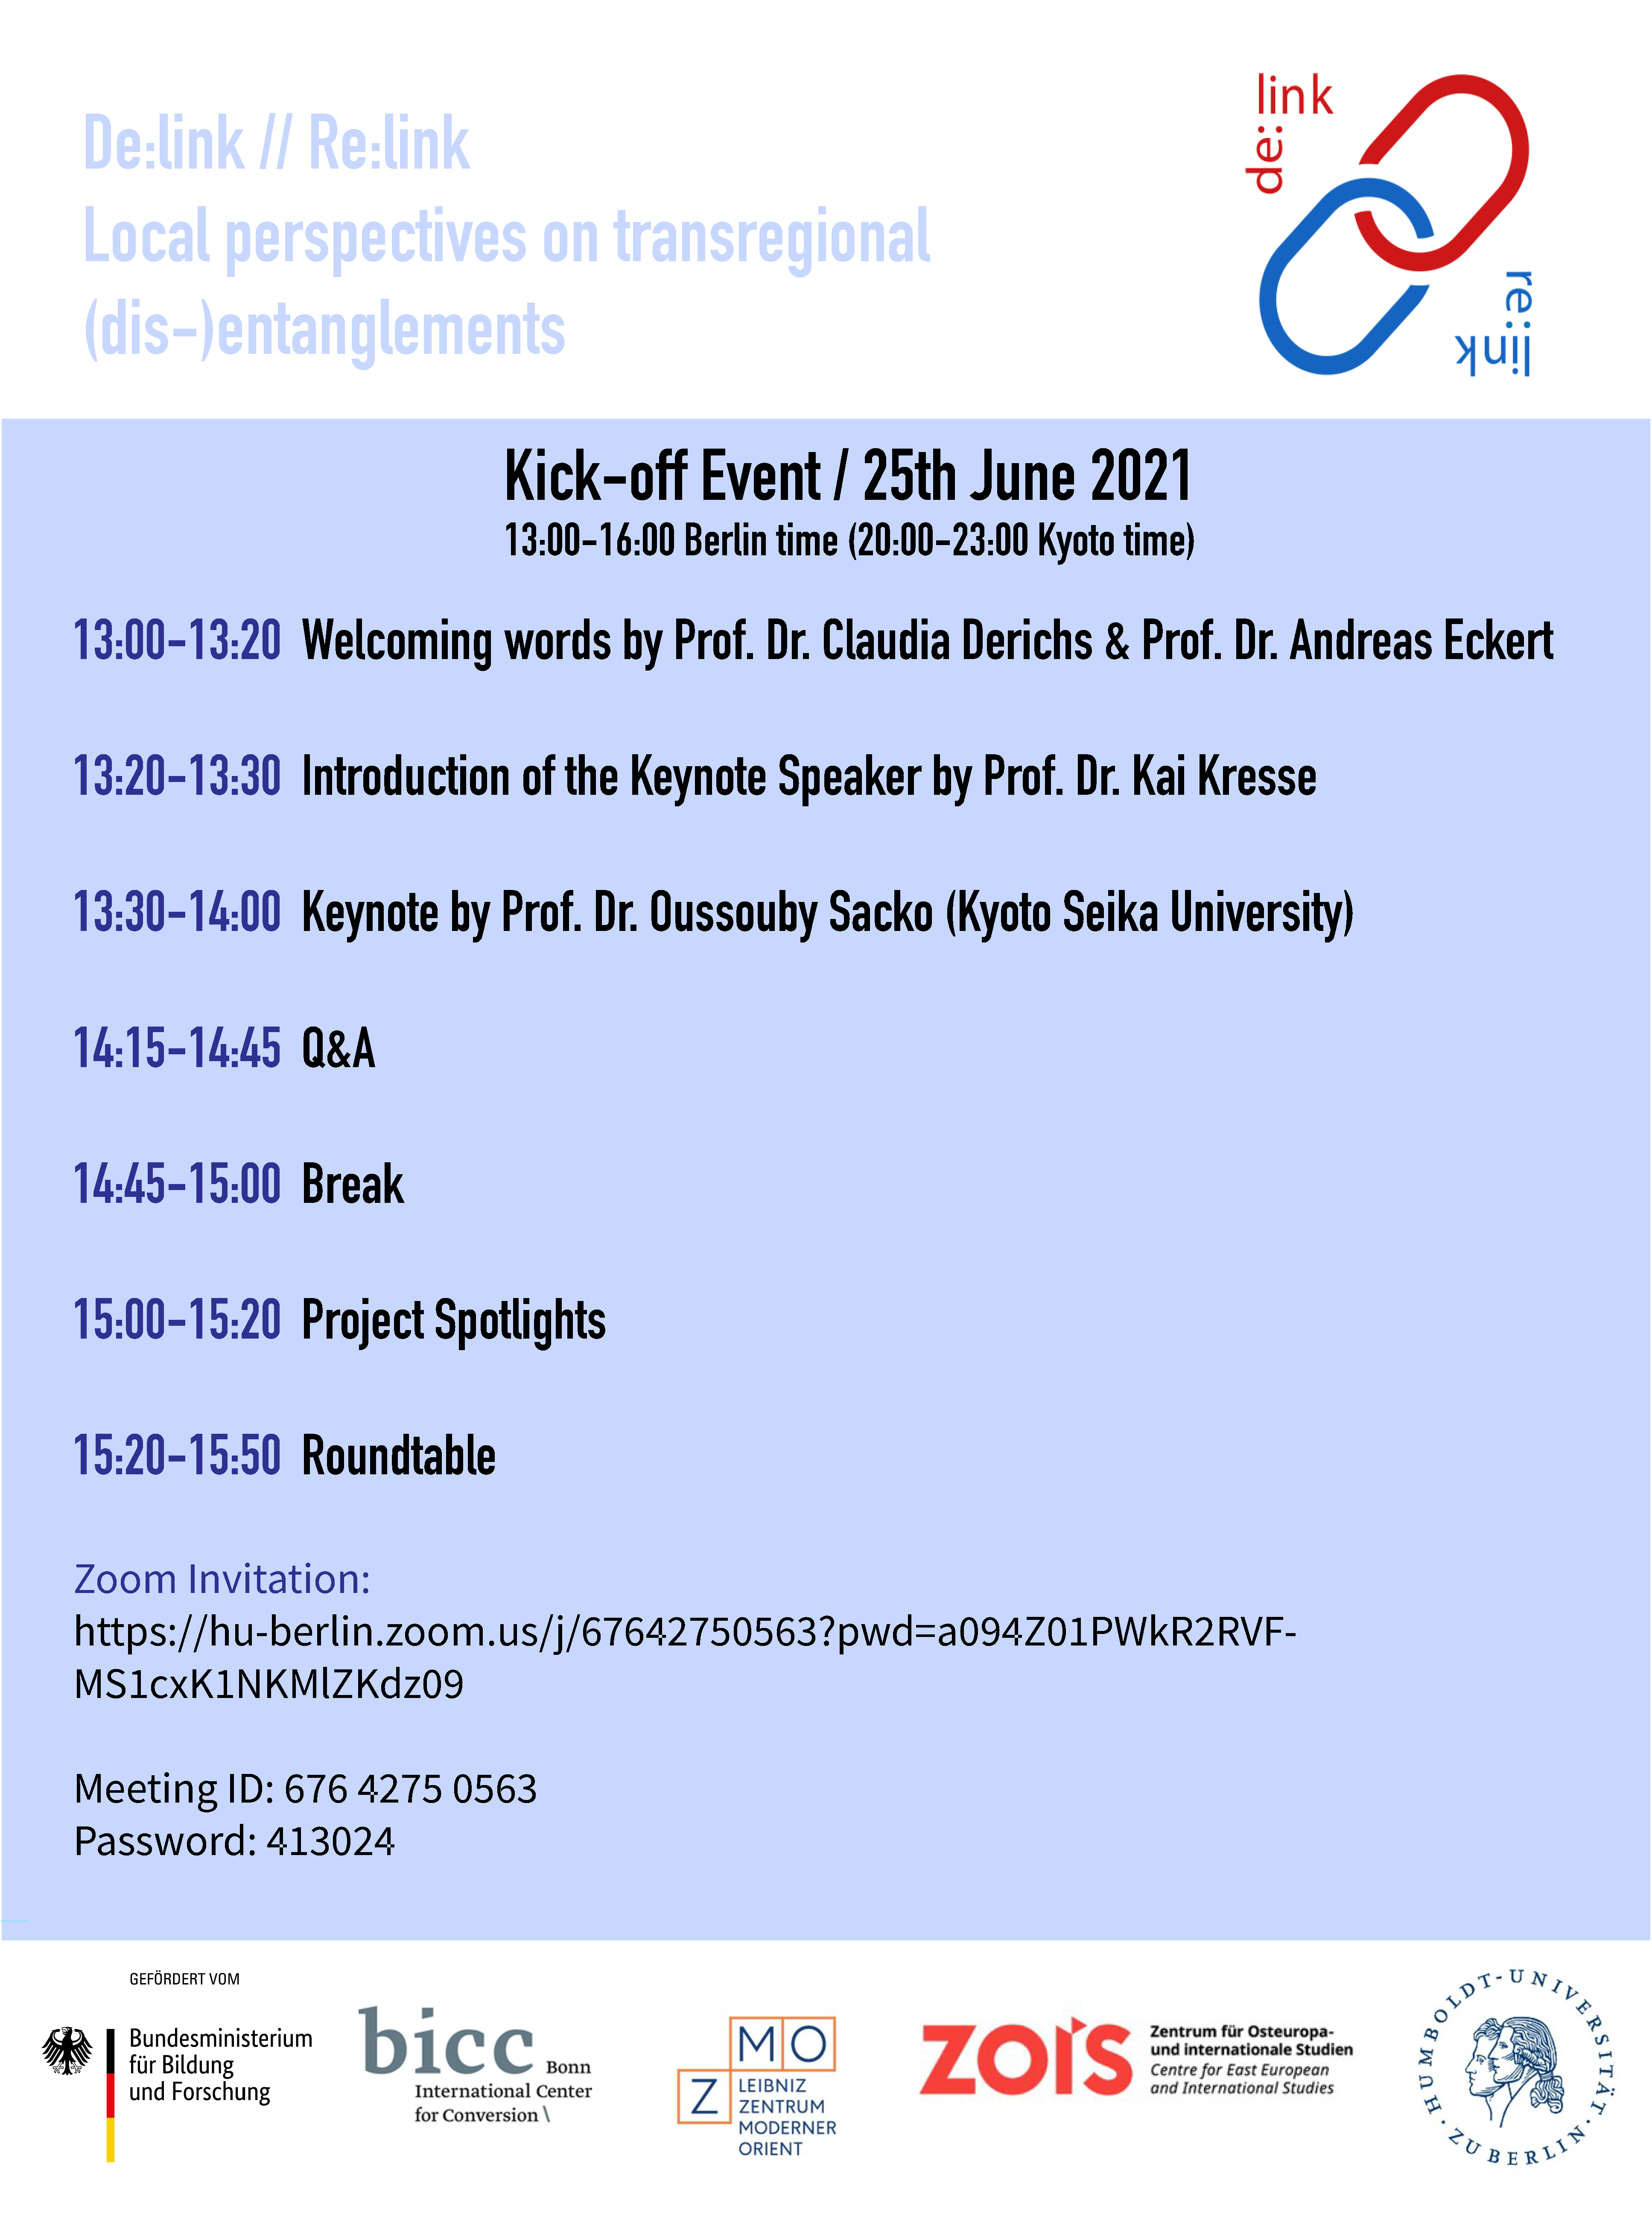 Kick-Off event Friday, 25.06.2021